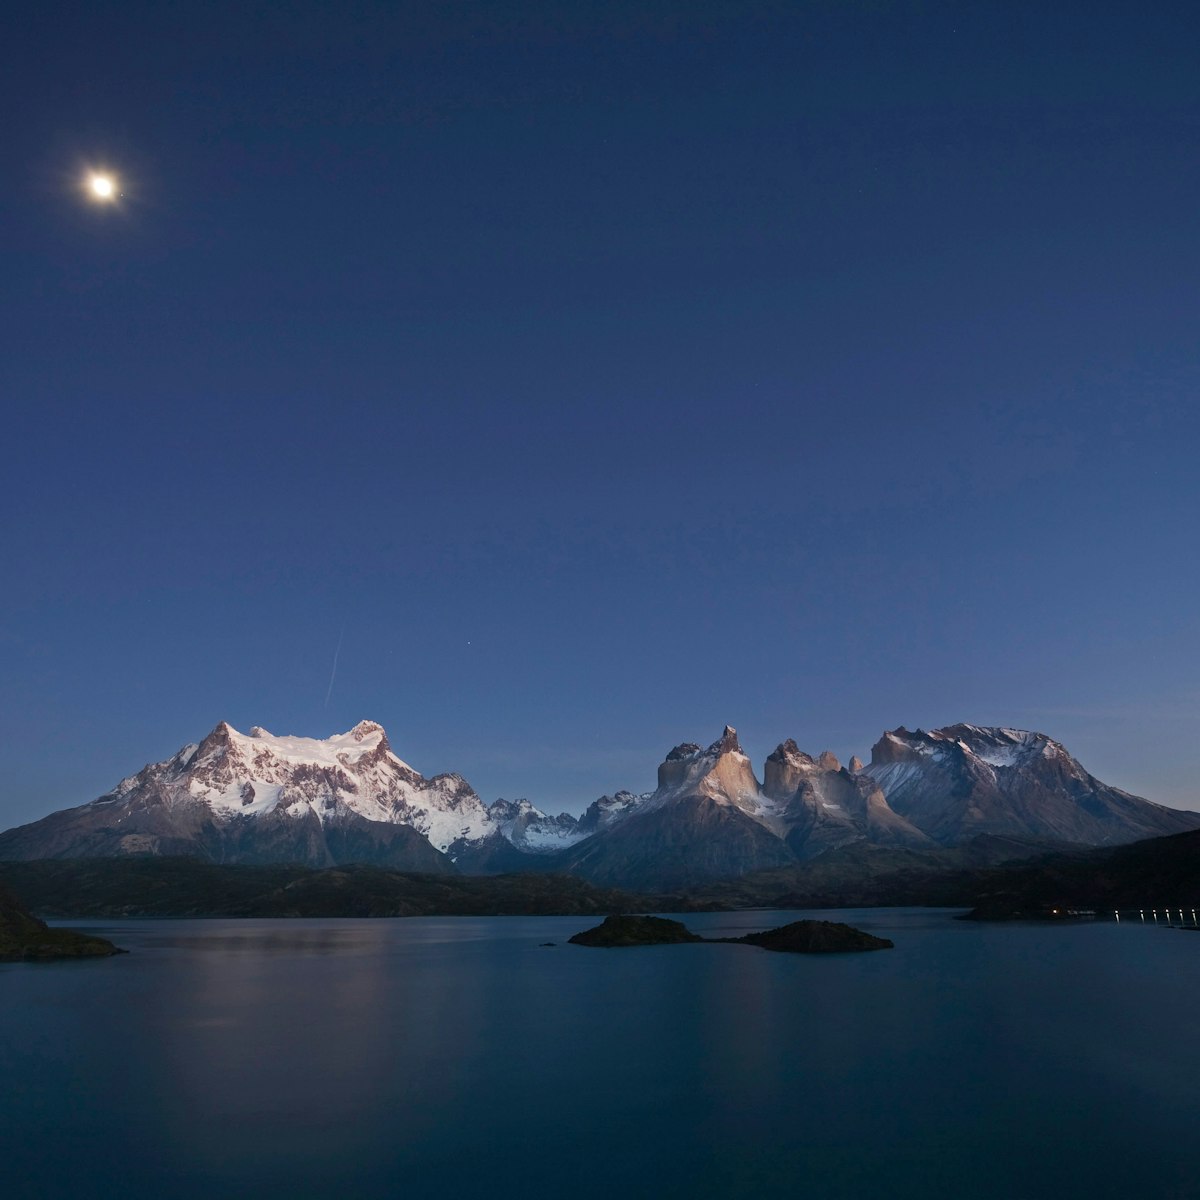 Dawn with moon at the Torres del Paine massif at Lake Lago Pehoe, National Park Torres del Paine, Patagonia, Chile